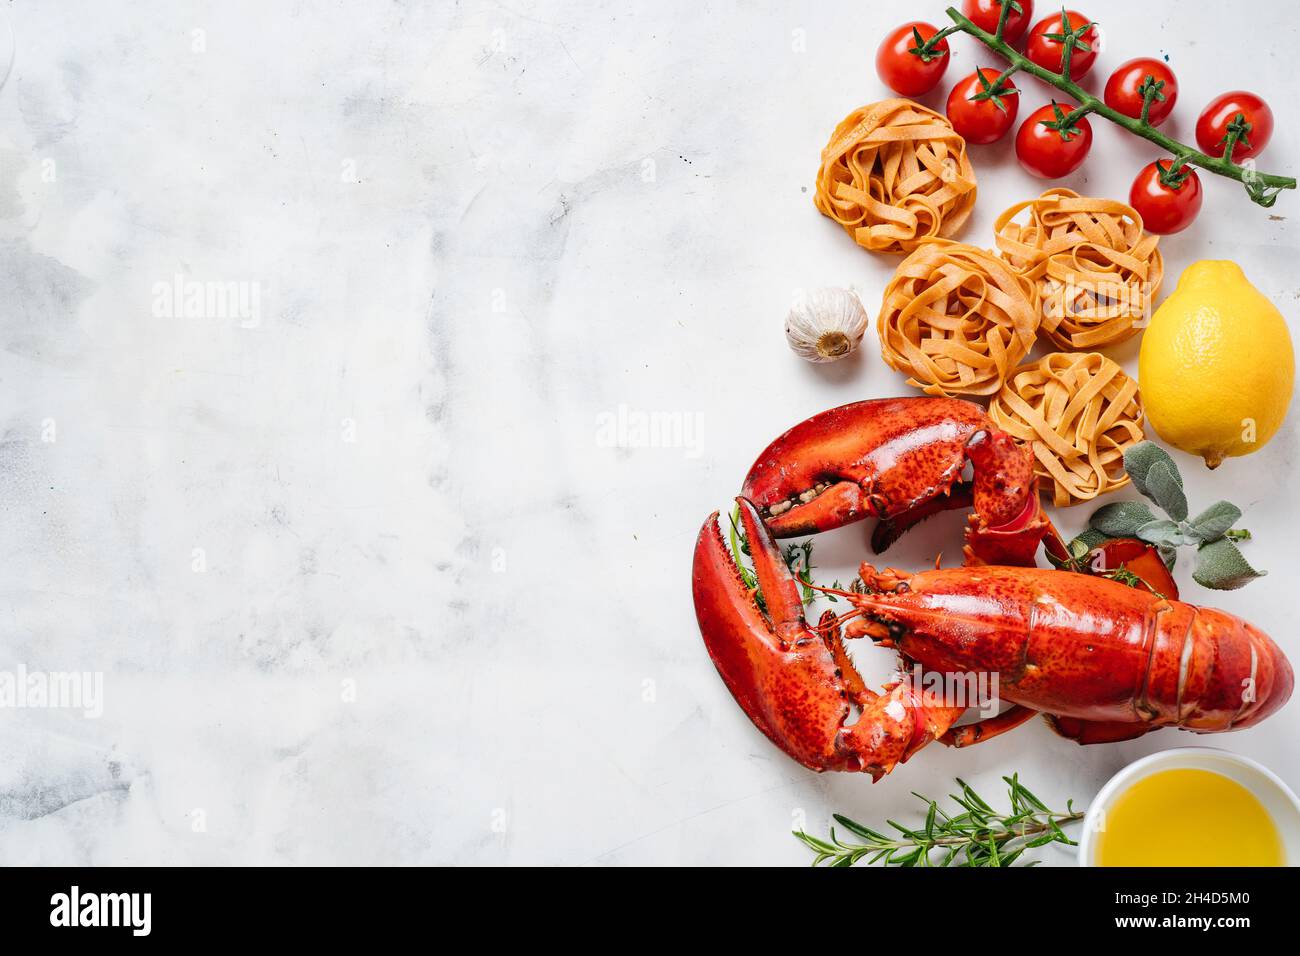 Delicious freshly cooked lobster with black pasta and vegetables Stock Photo